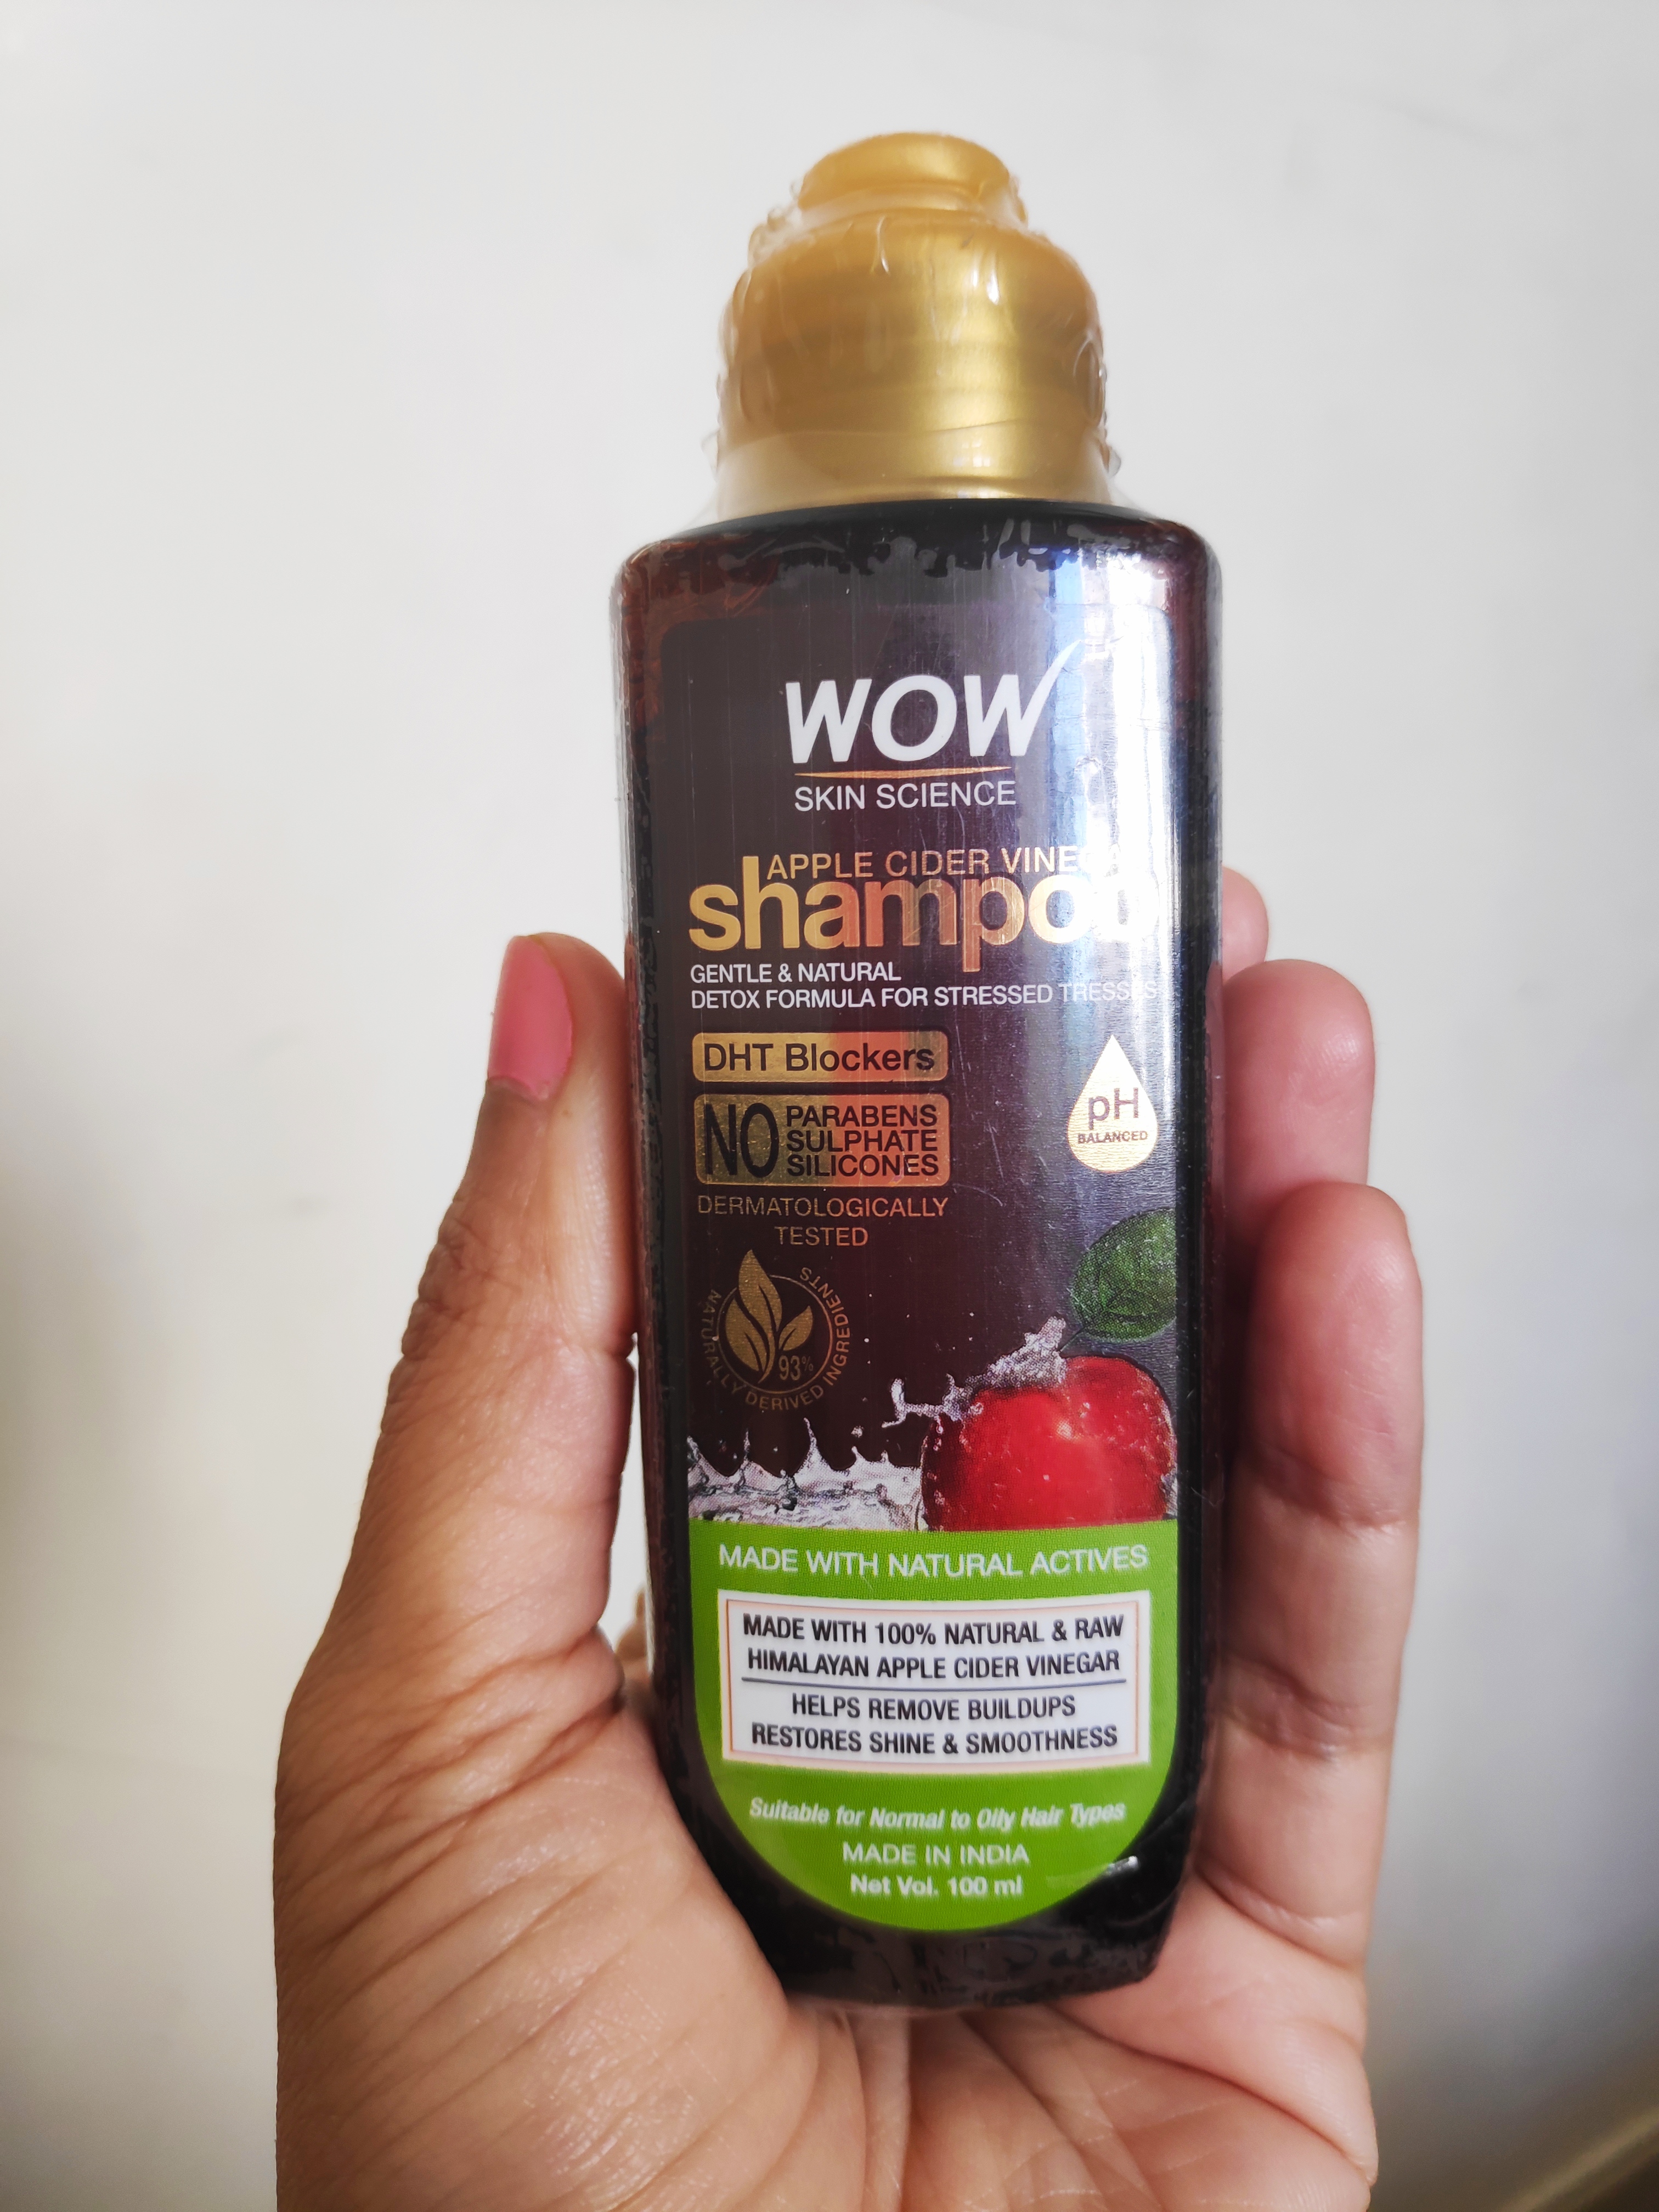 WOW Skin Science Apple Cider Vinegar Shampoo - No Parabens & Sulphate - 300 ml-Perfect hair care solution for dull and stressed hair-By ipsita_sinha